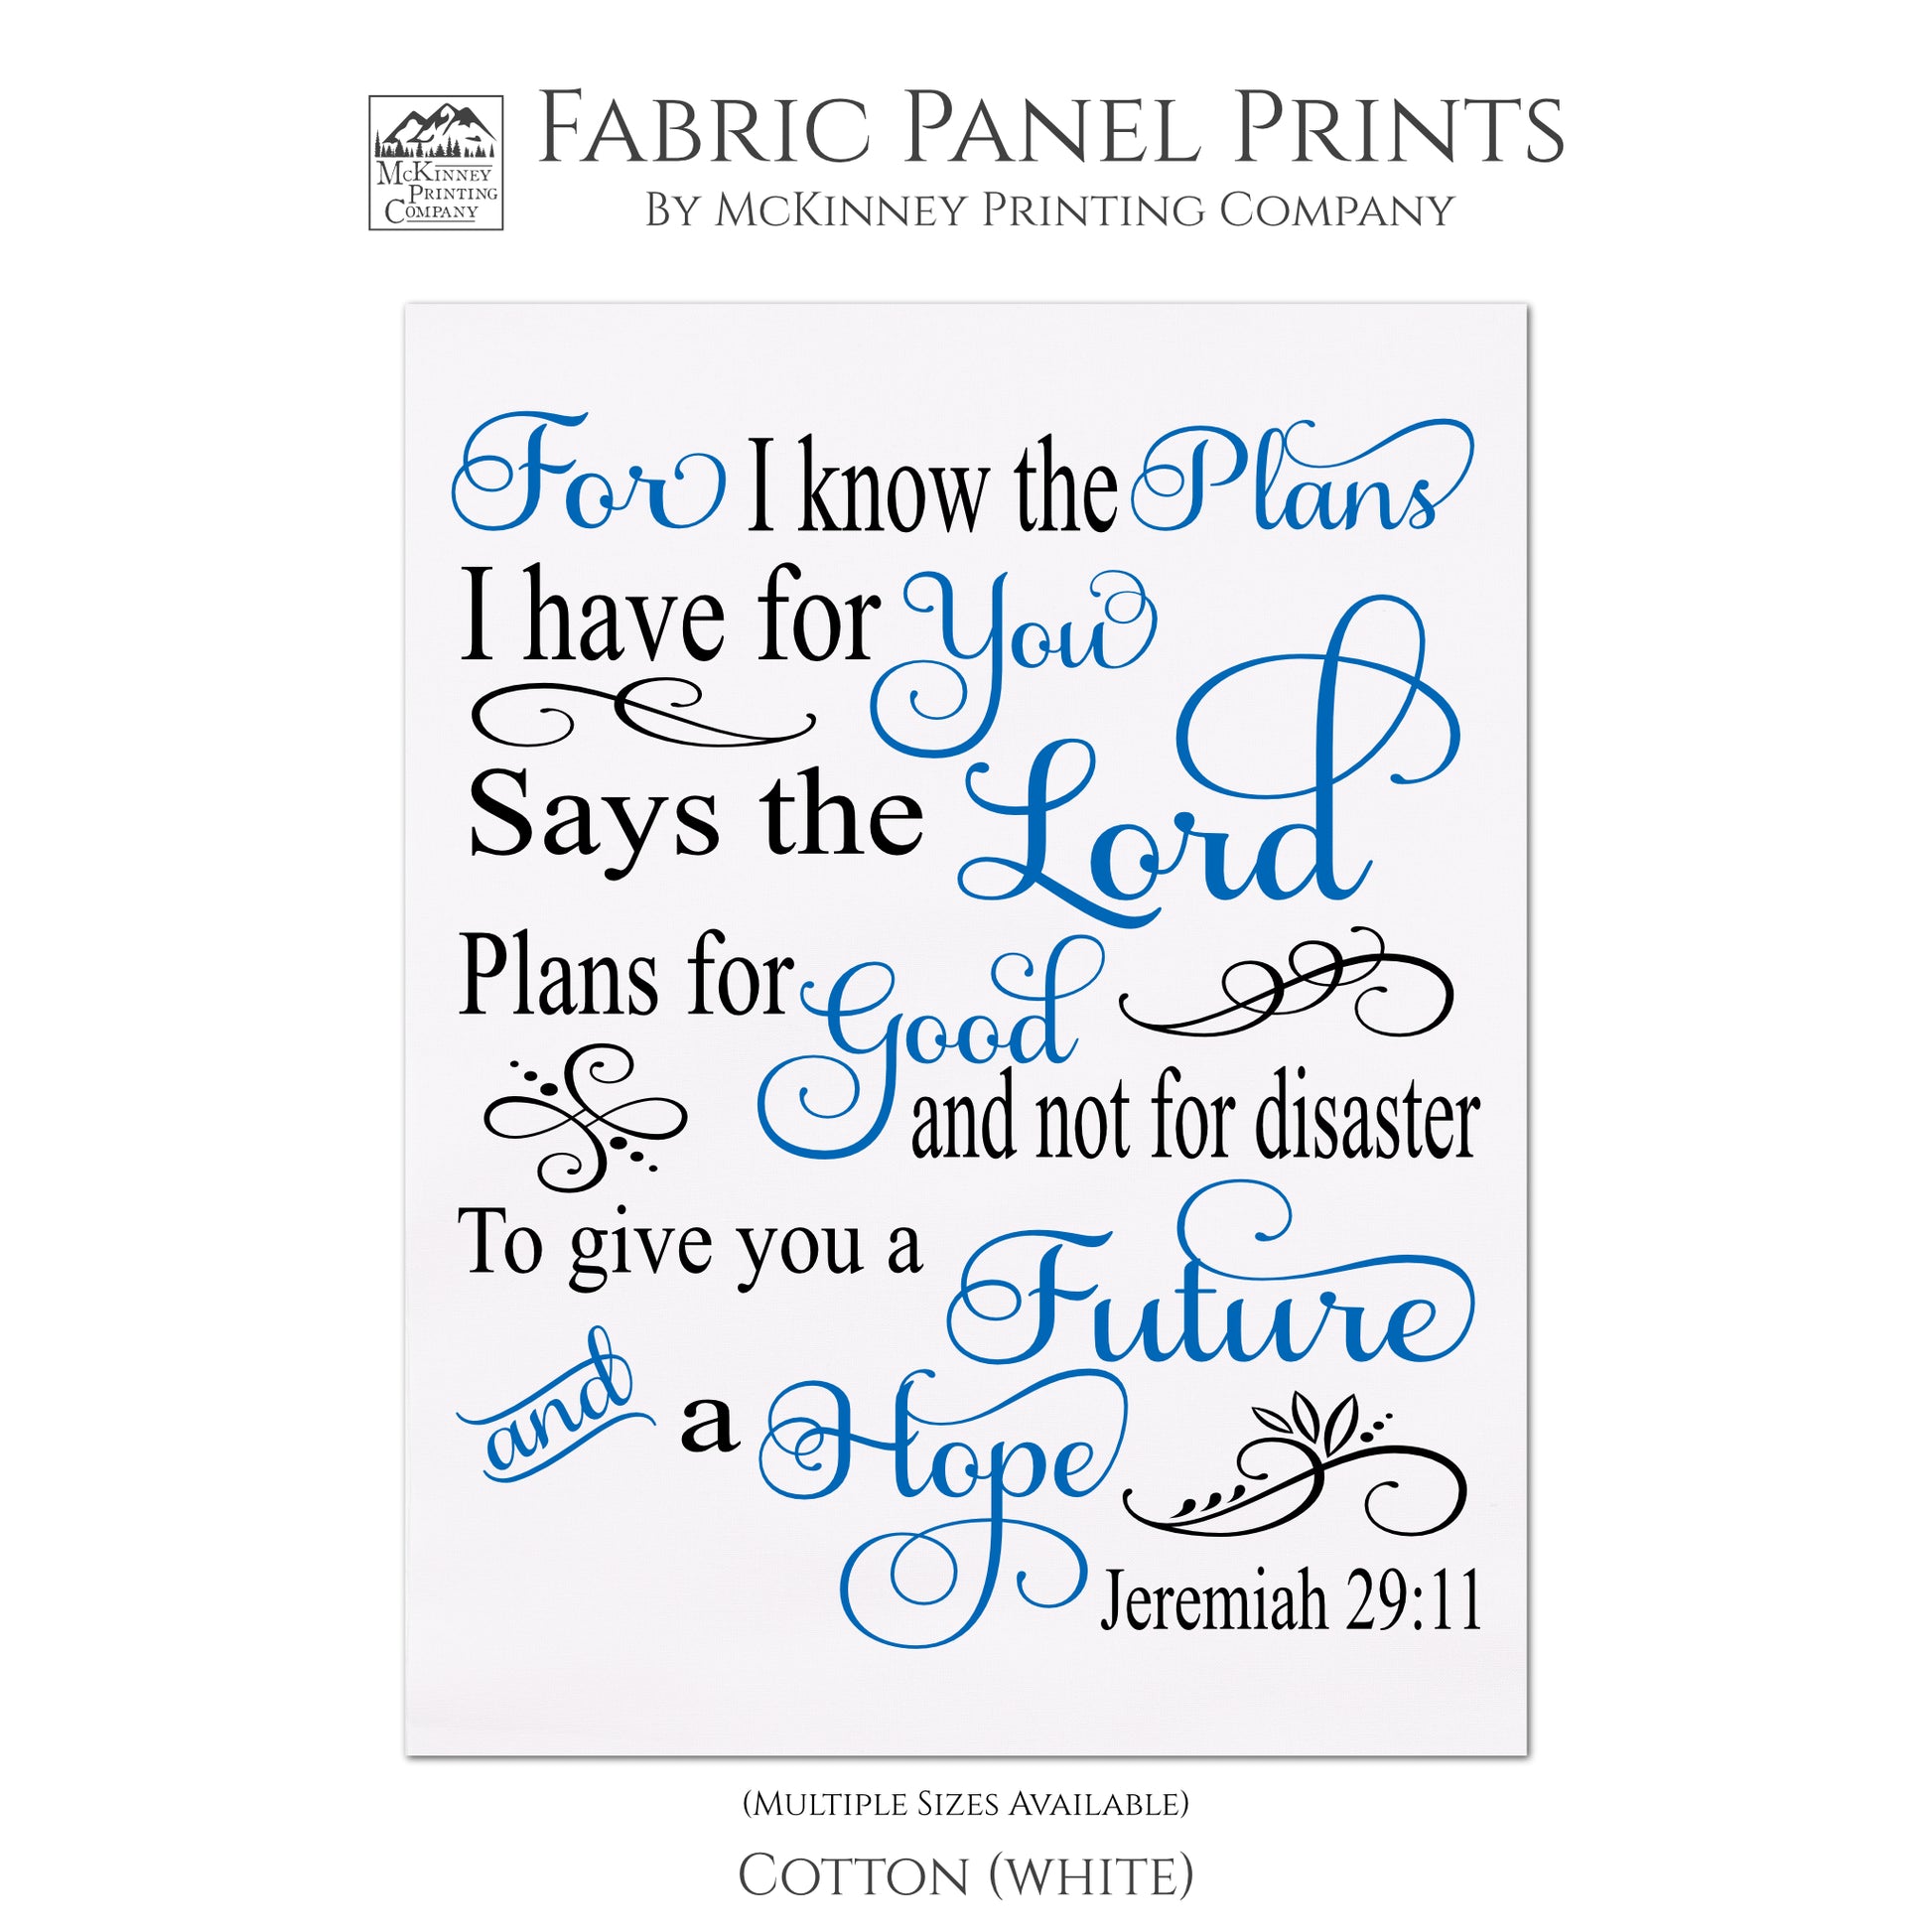 For I know the plans I have for you says the Lord. Plans for good and not for disaster. To give you a Future and a Hope. - Jeremiah 29:11, Fabric Panel Print, Quilt Block, Sewing, Craft - Cotton, White